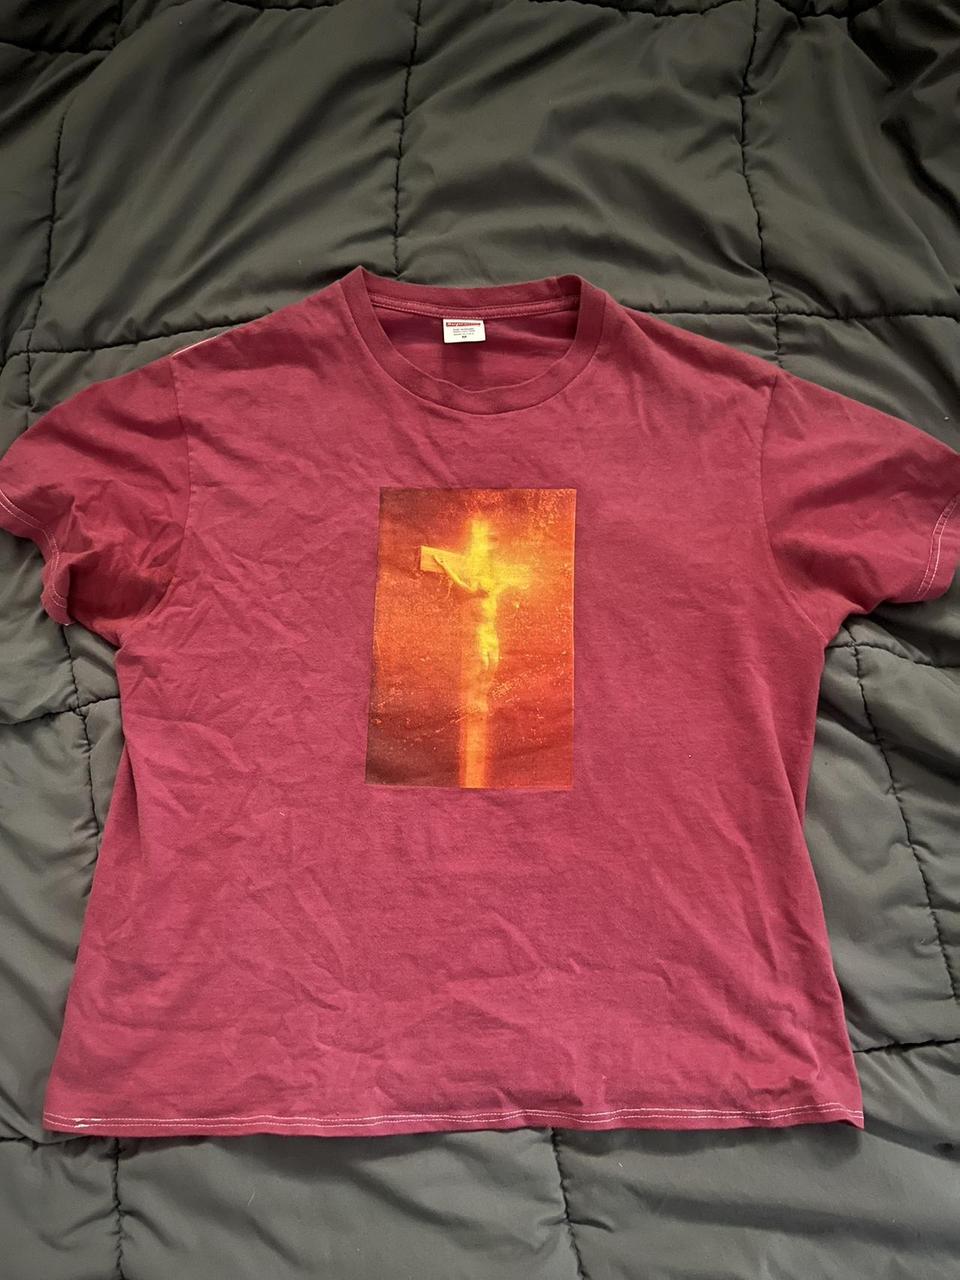 Supreme - Piss Christ Andres Serrano Tee, Great...